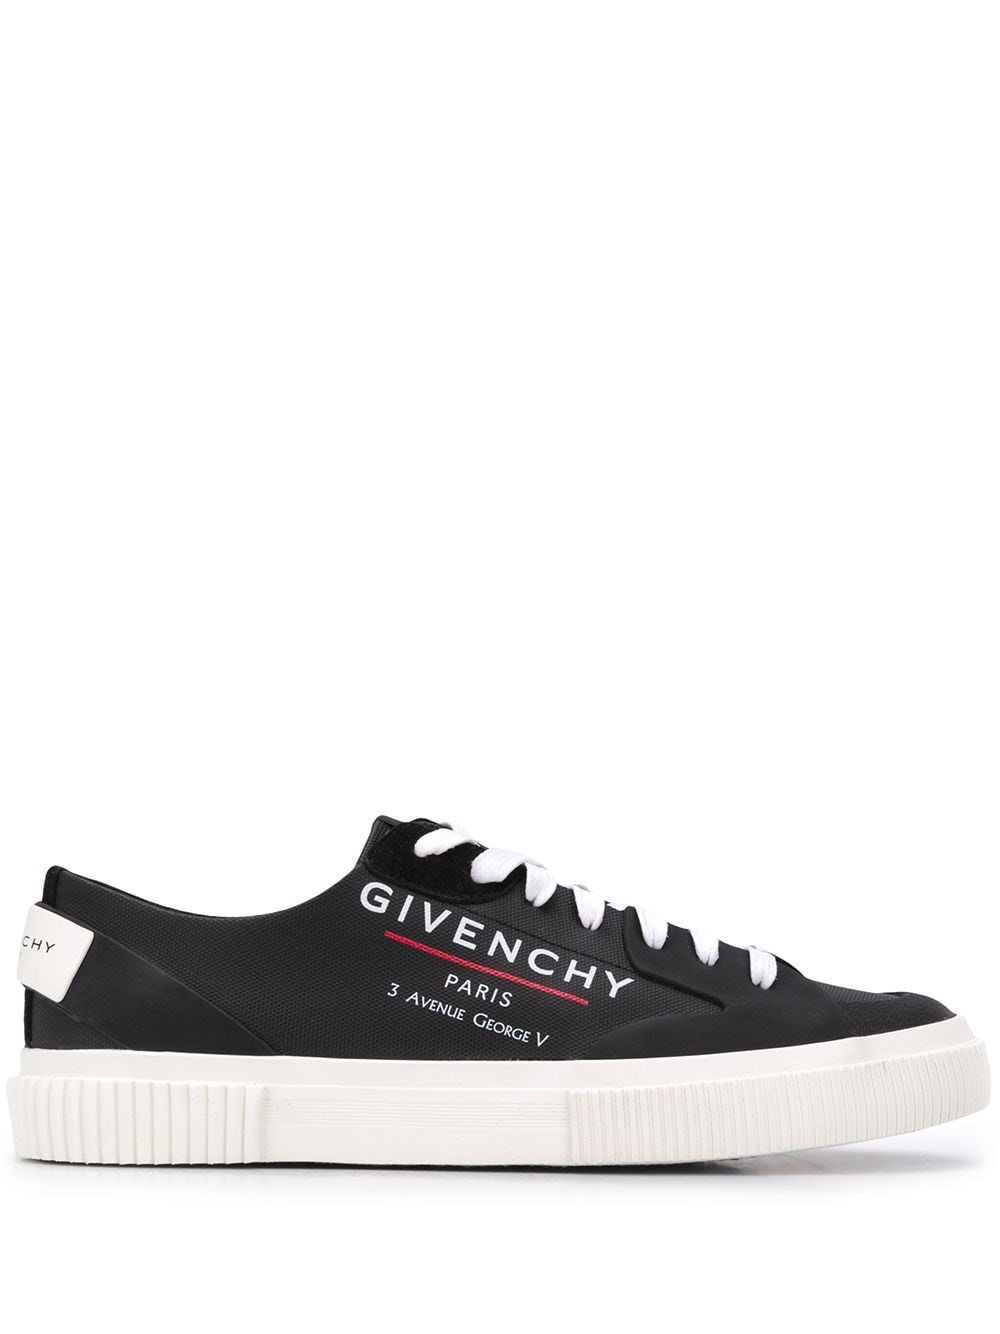 GIVENCHY 'TENNIS' SNEAKERS | Dante5.com BH001TH0L9001